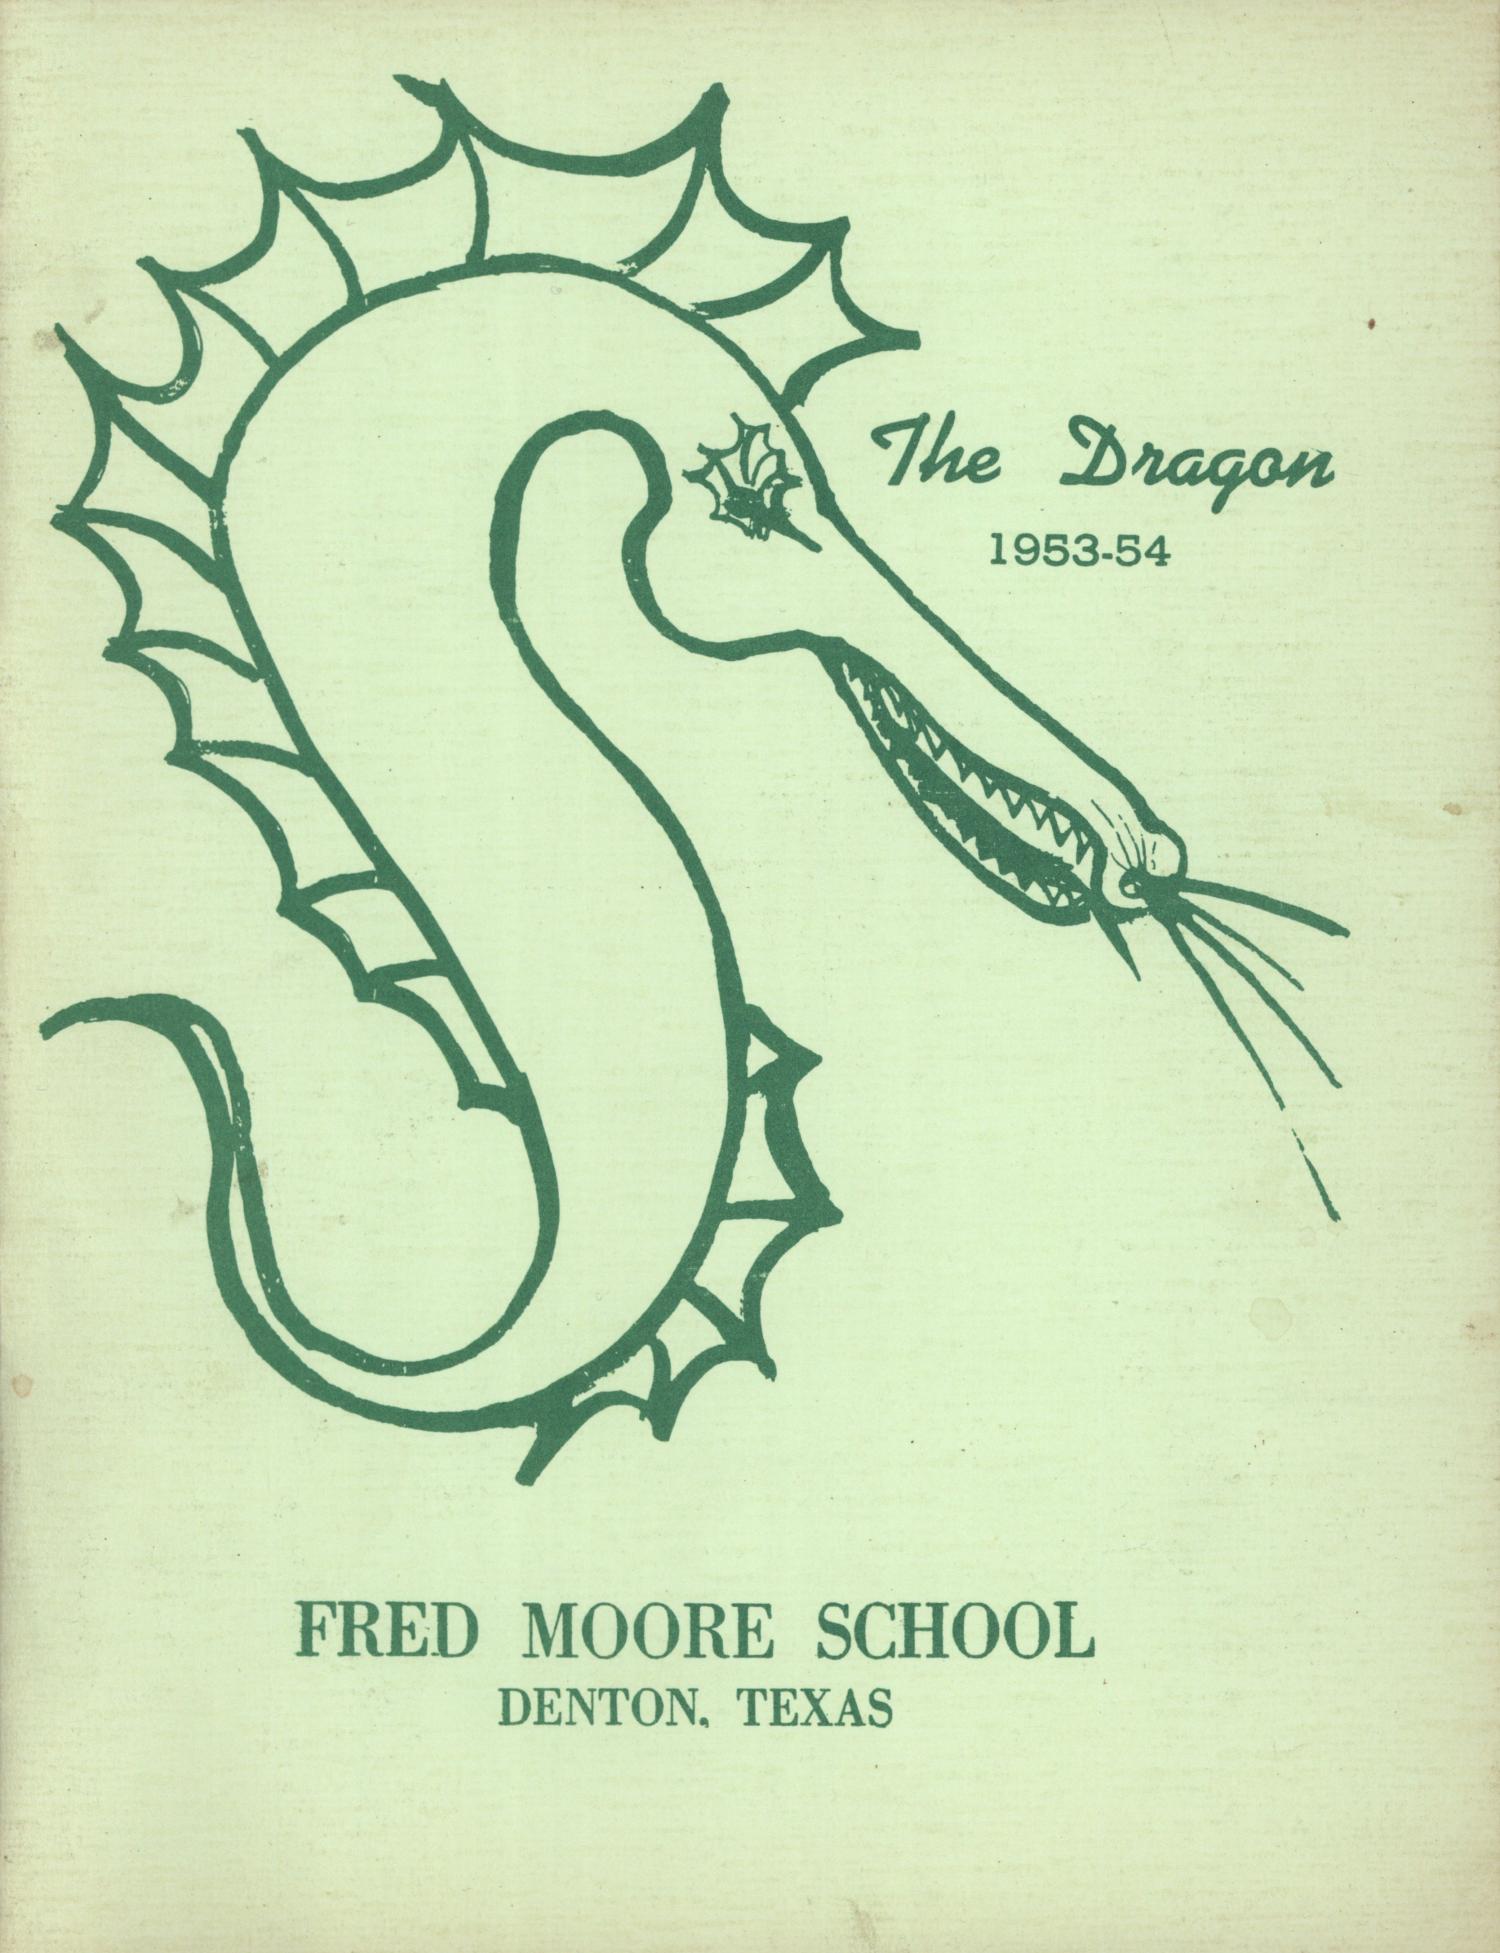 The Dragon, Yearbook of Fred Moore High School, 1953
                                                
                                                    Front Cover
                                                